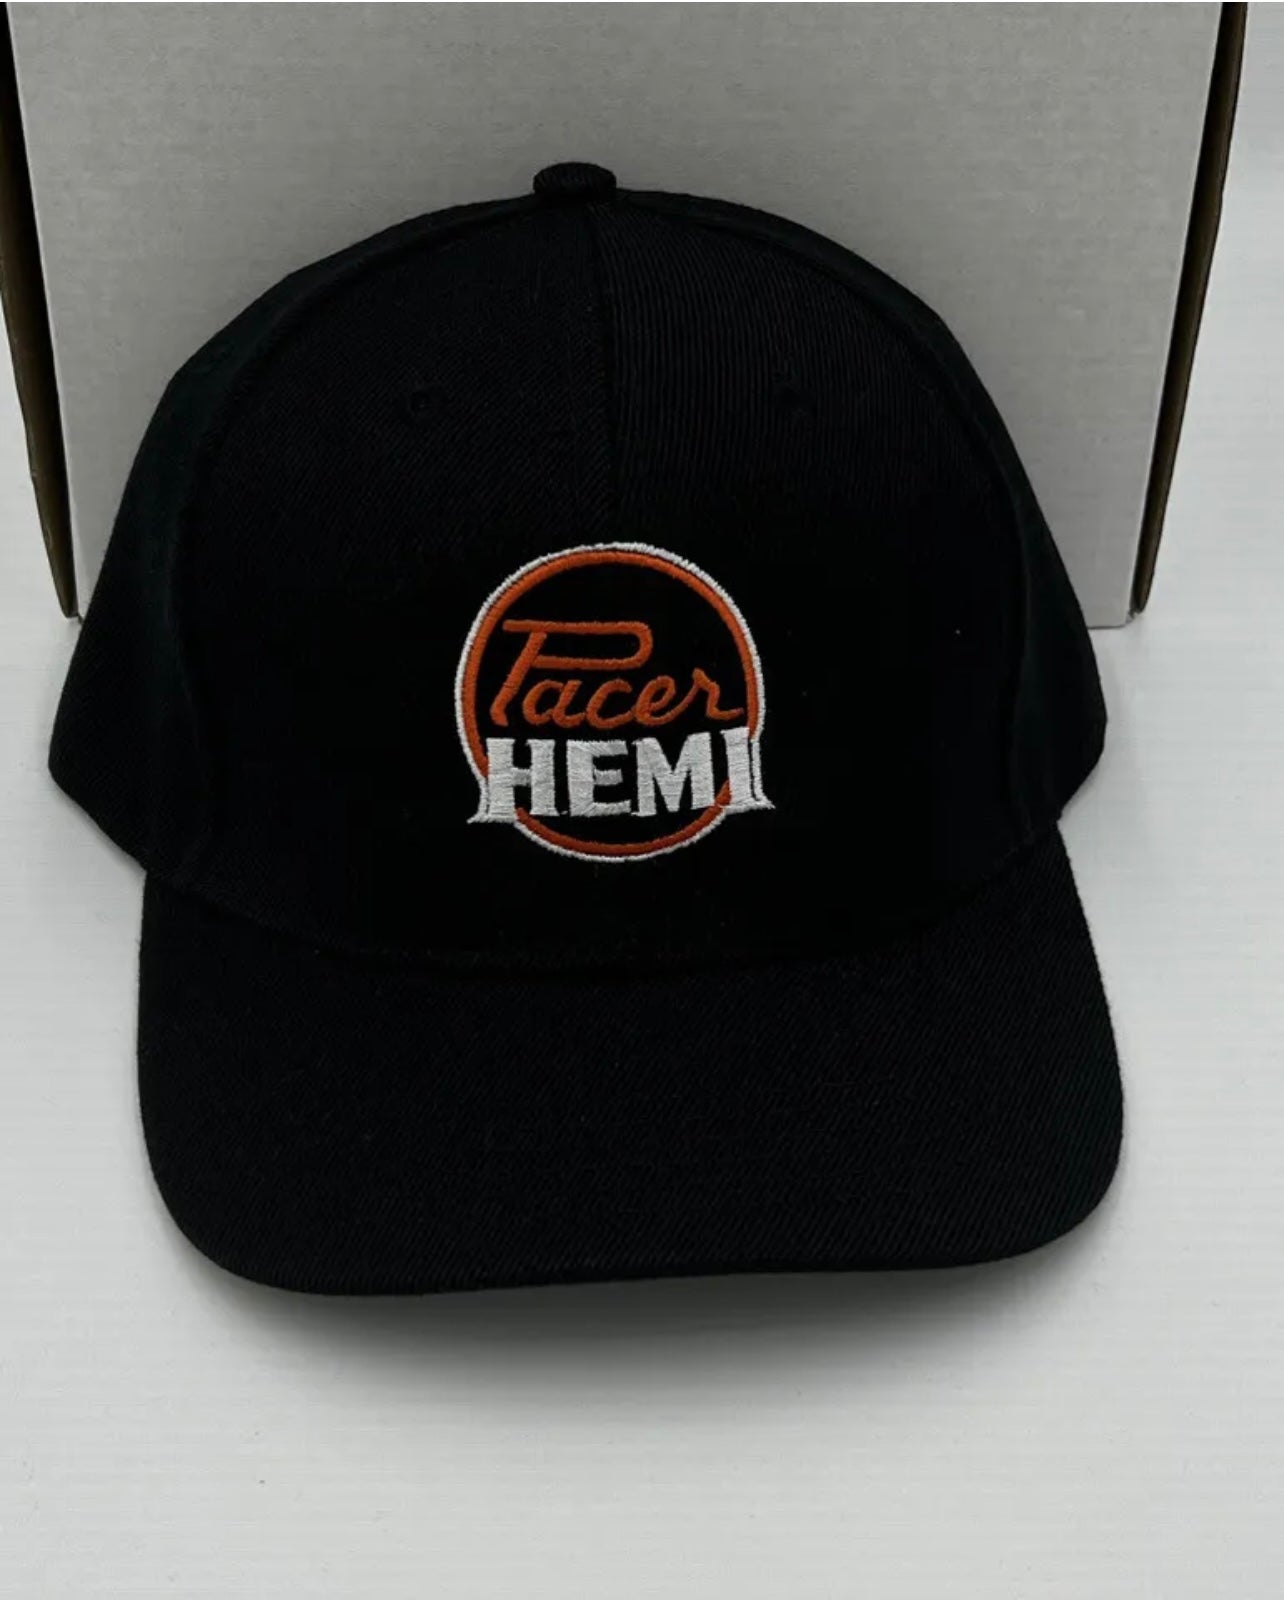 Pacer Hemi Embroidered Hat